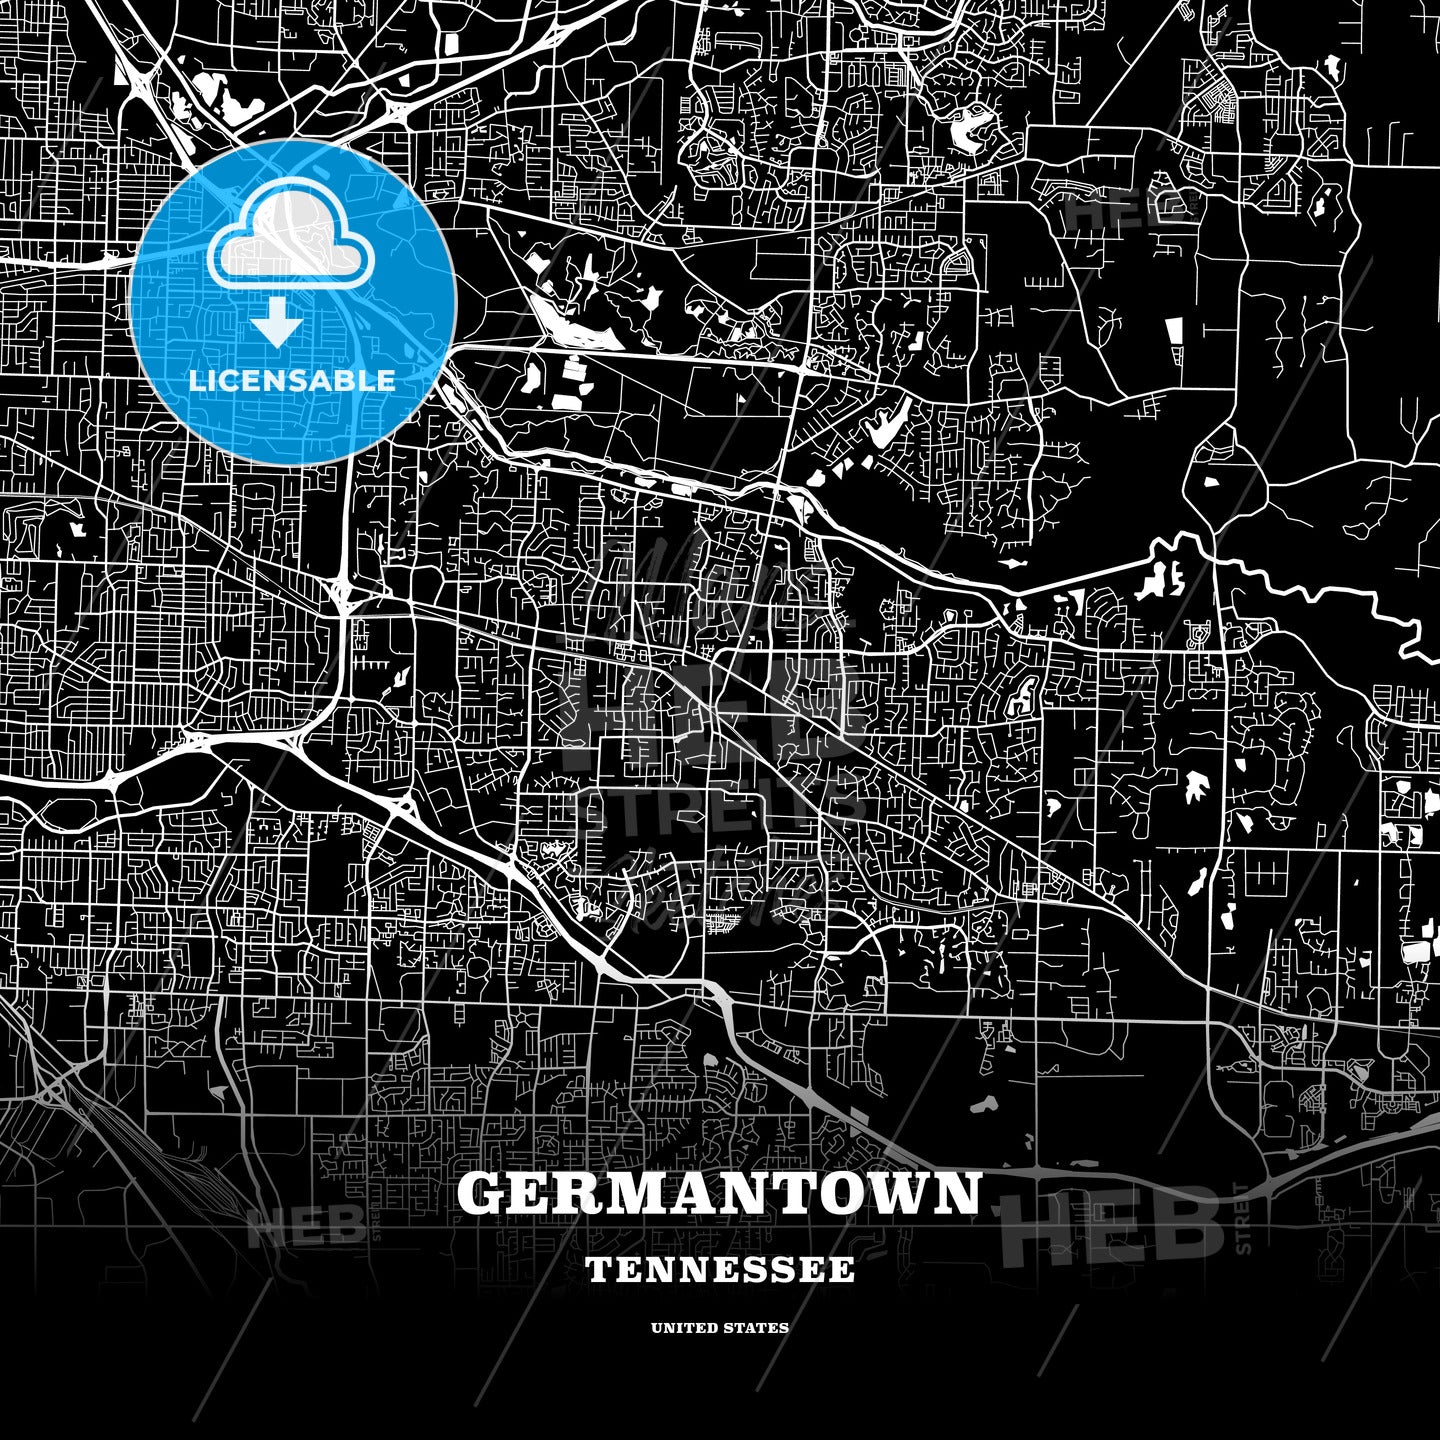 Germantown, Tennessee, USA map